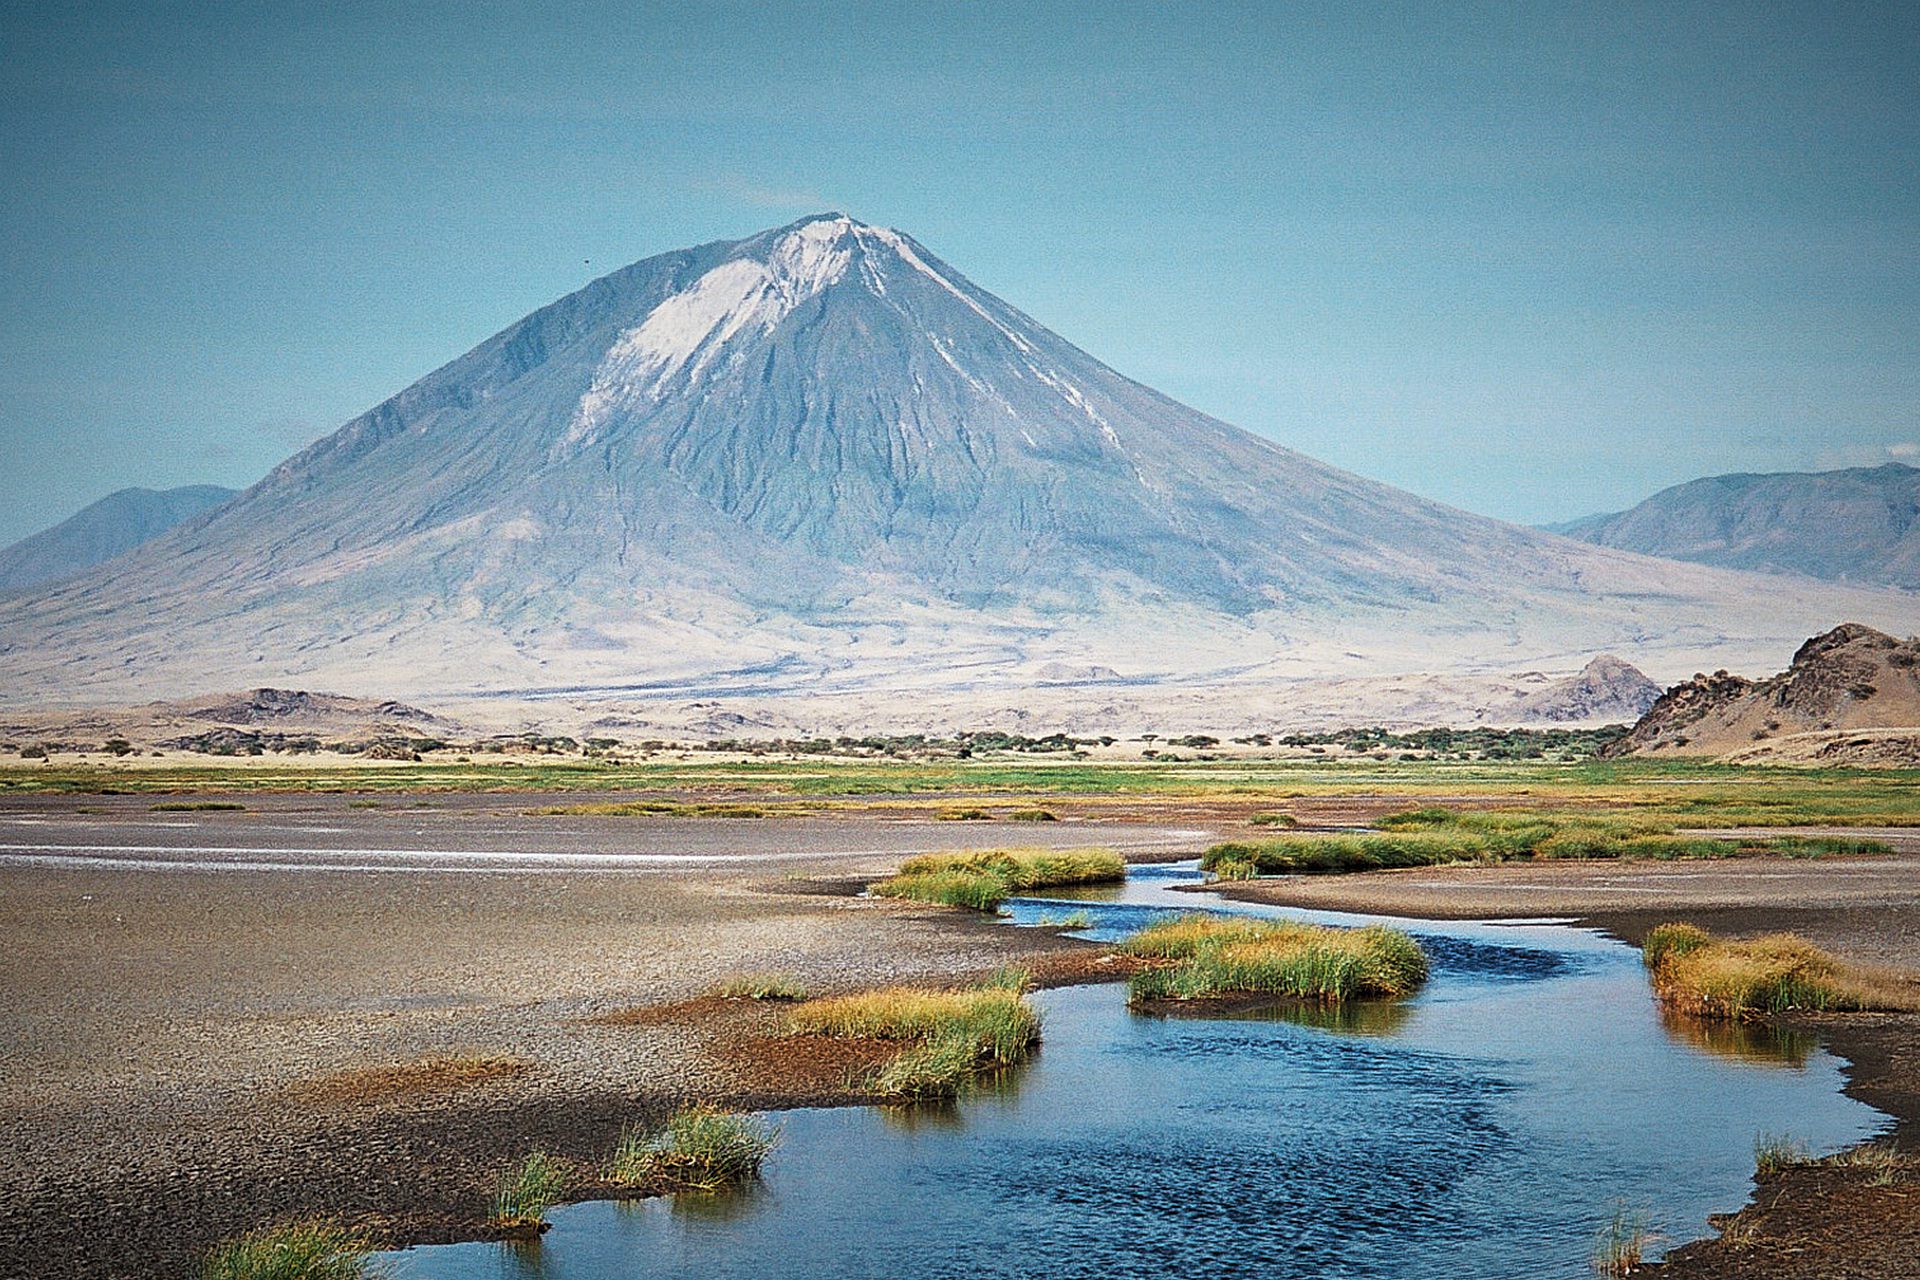 Locally known as the “Sacred Mountain of God” in the Maasai Language, Mount Ol Doinyo Lengai is an active volcano located south of Lake Natron in North Tanzania’s eastern rift valley.